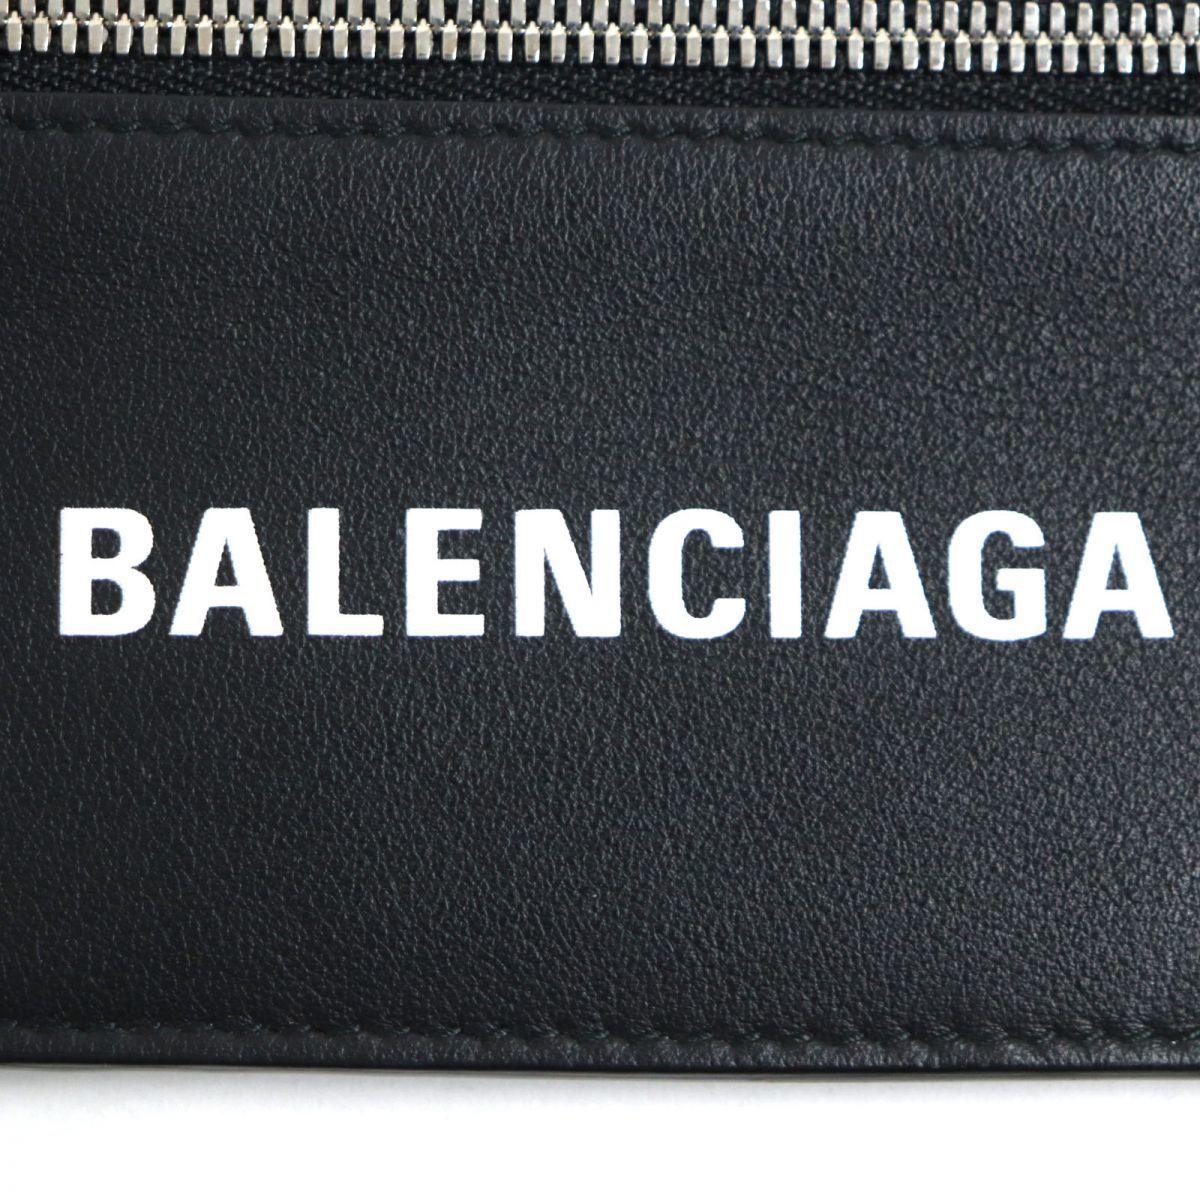  ultimate beautiful goods V Balenciaga 501651 with logo leather coin perth / card-case / pass case black × white men's made in Italy box * storage bag attaching 